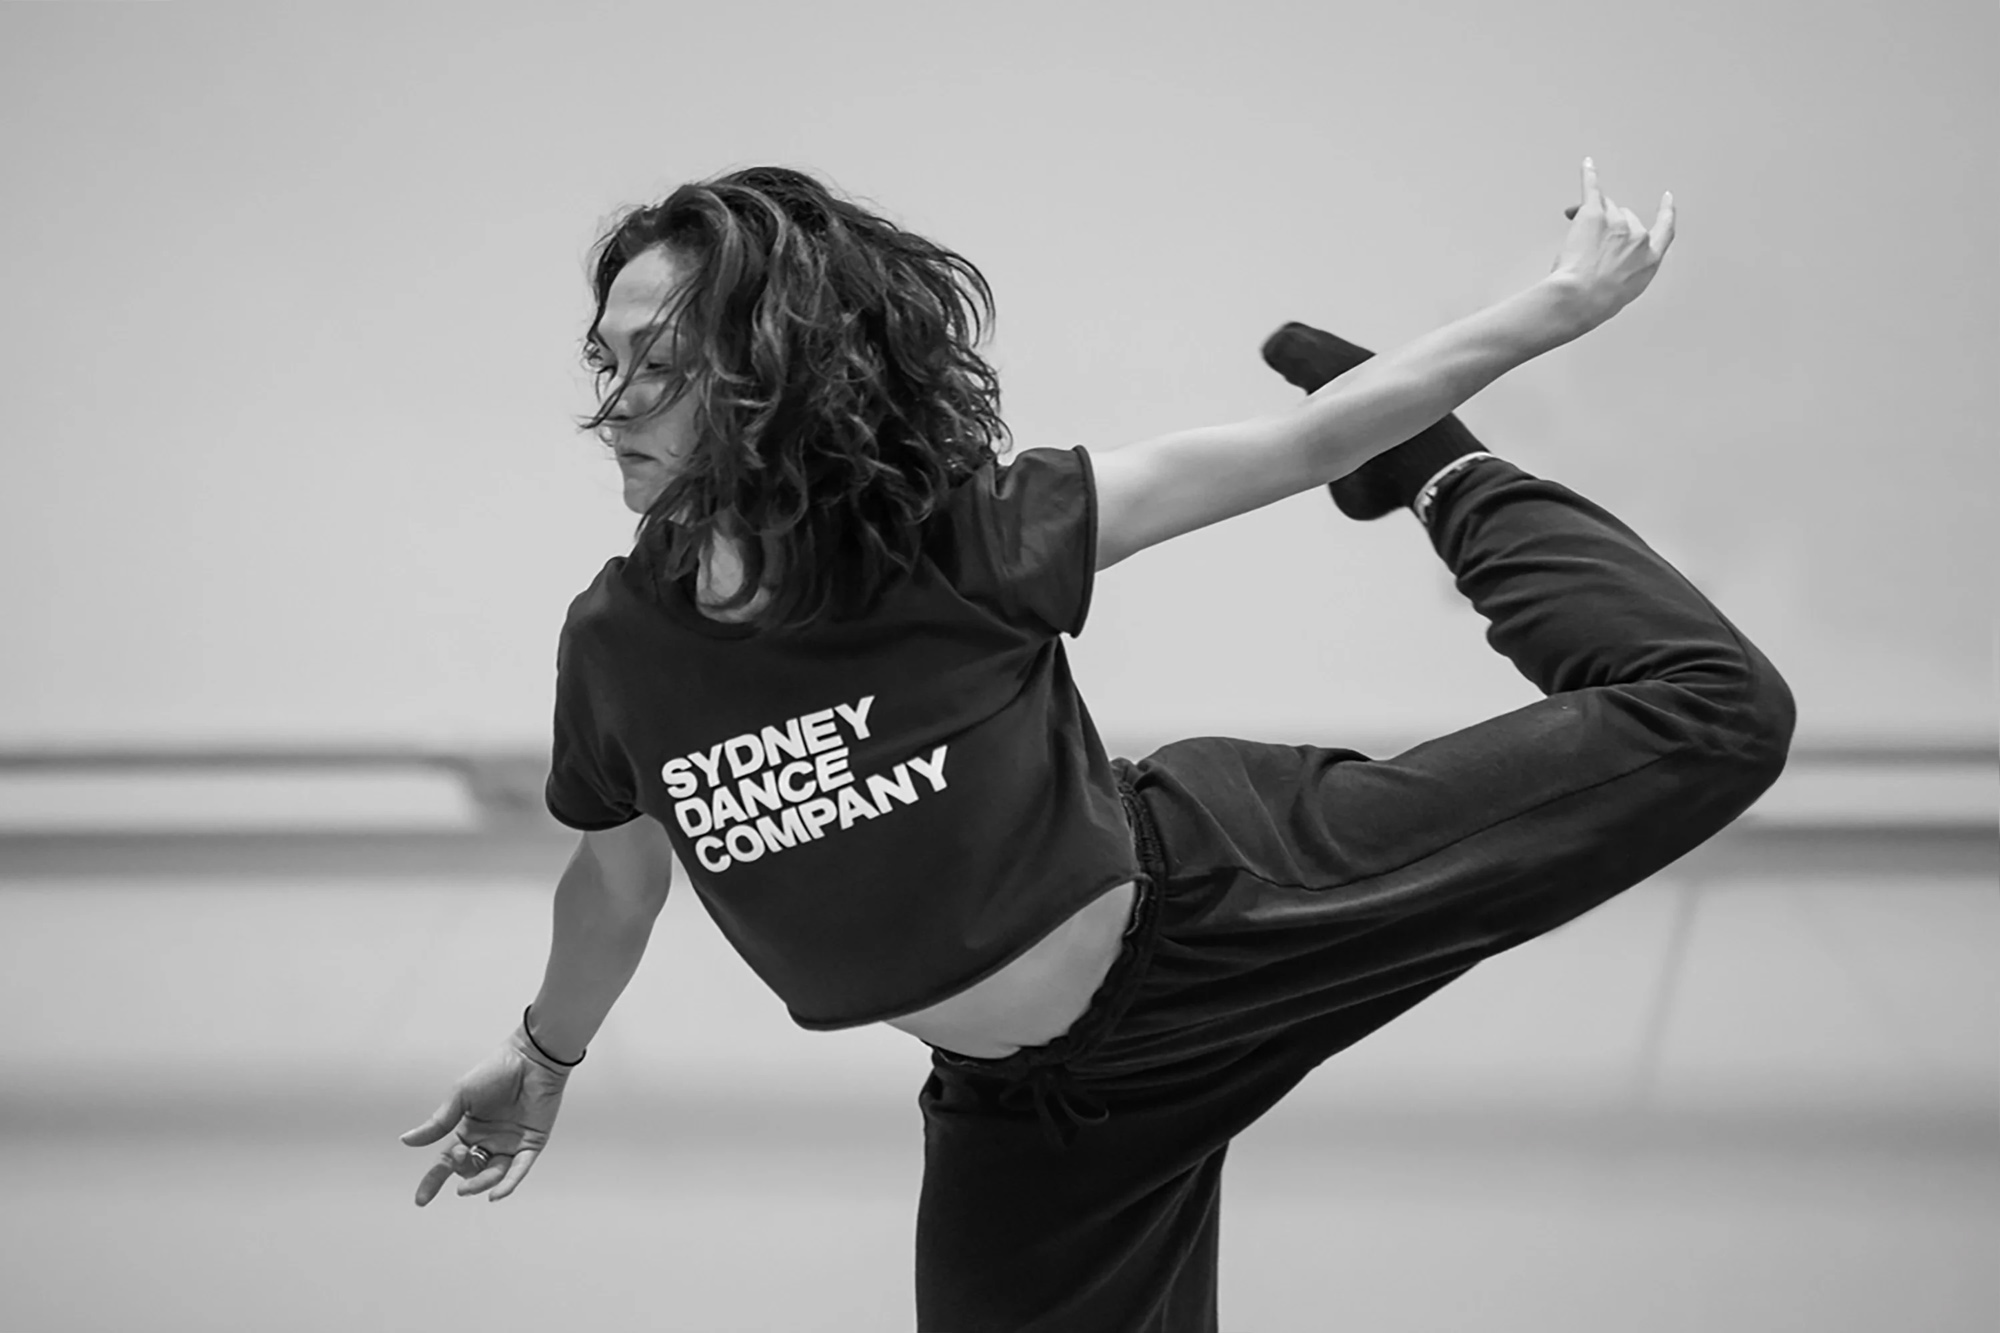 New Logo and Identity for Sydney Dance Company by Maud